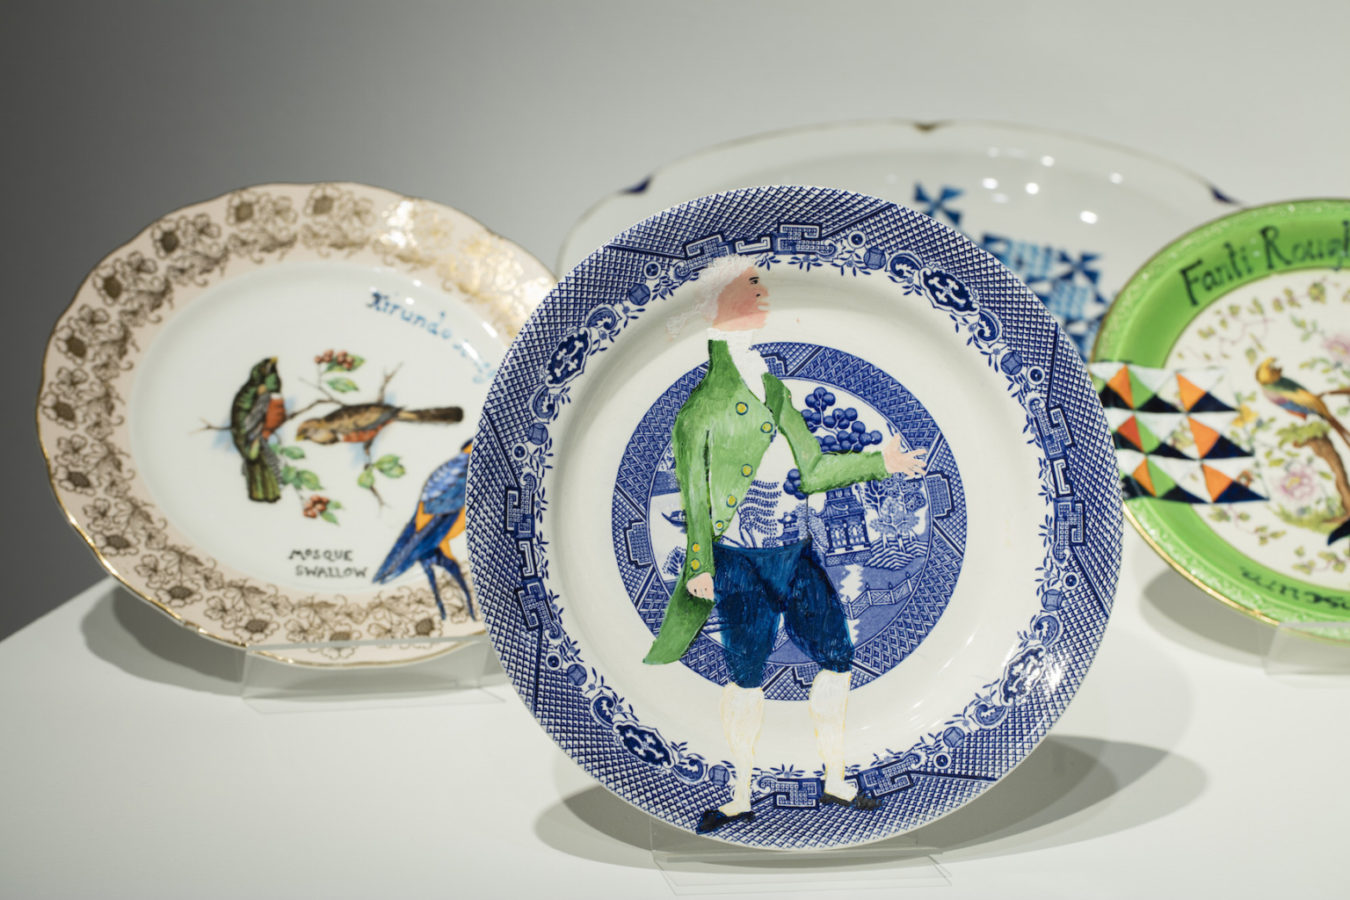 Lubaina Himid, Swallow Hard: The Lancaster Dinner Service, 2007, Ferens Art Gallery. Hull, photograph by David Levene, lubaina himid's dinner service